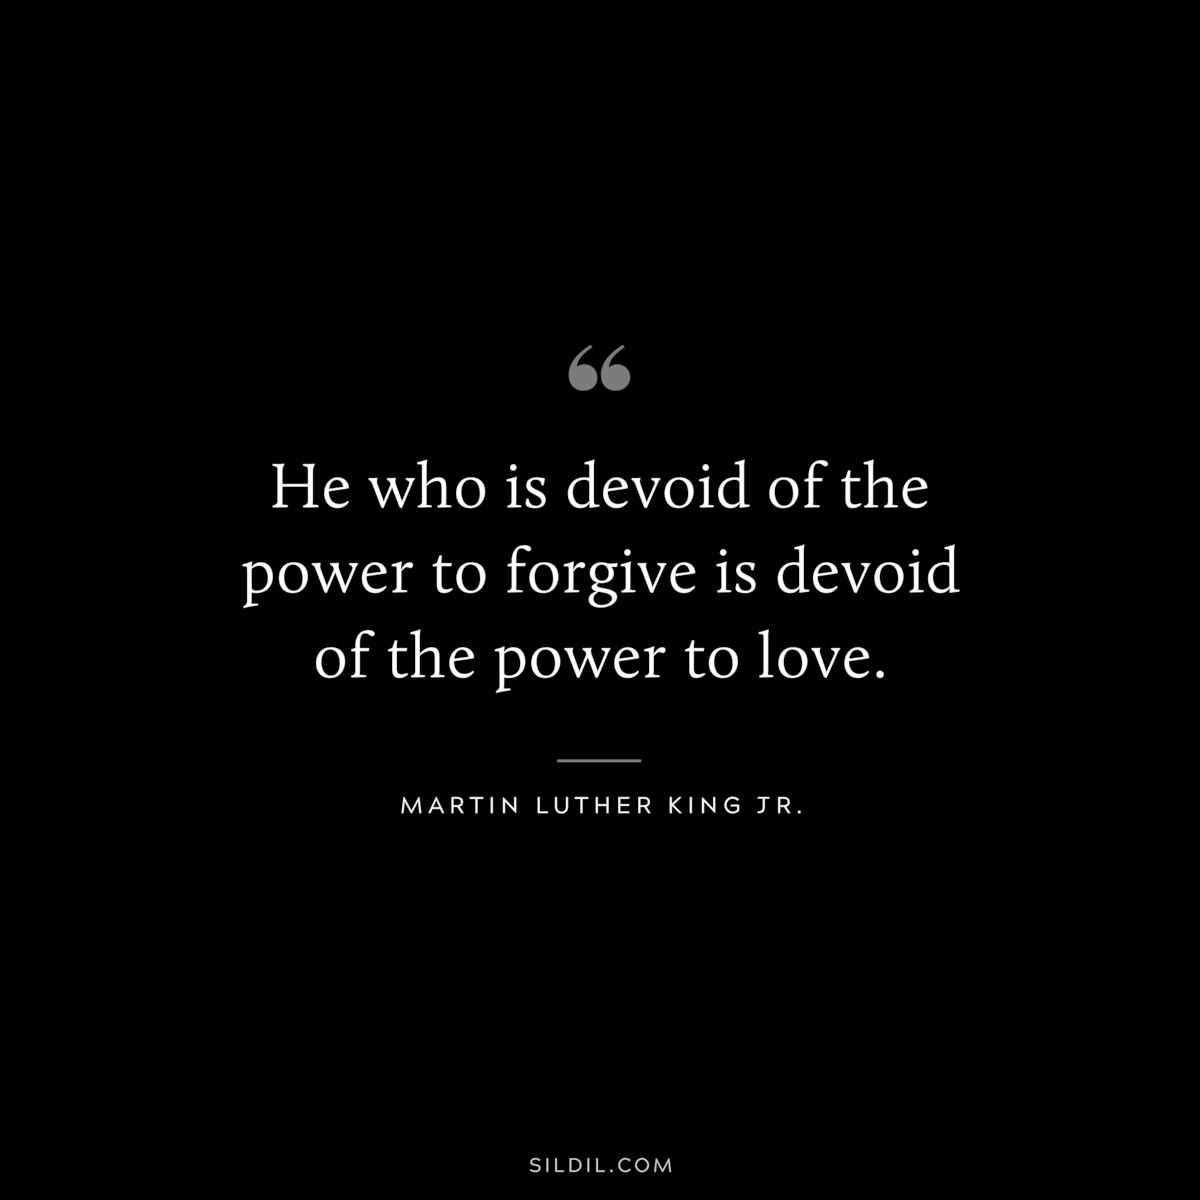 He who is devoid of the power to forgive is devoid of the power to love. ― Martin Luther King Jr.